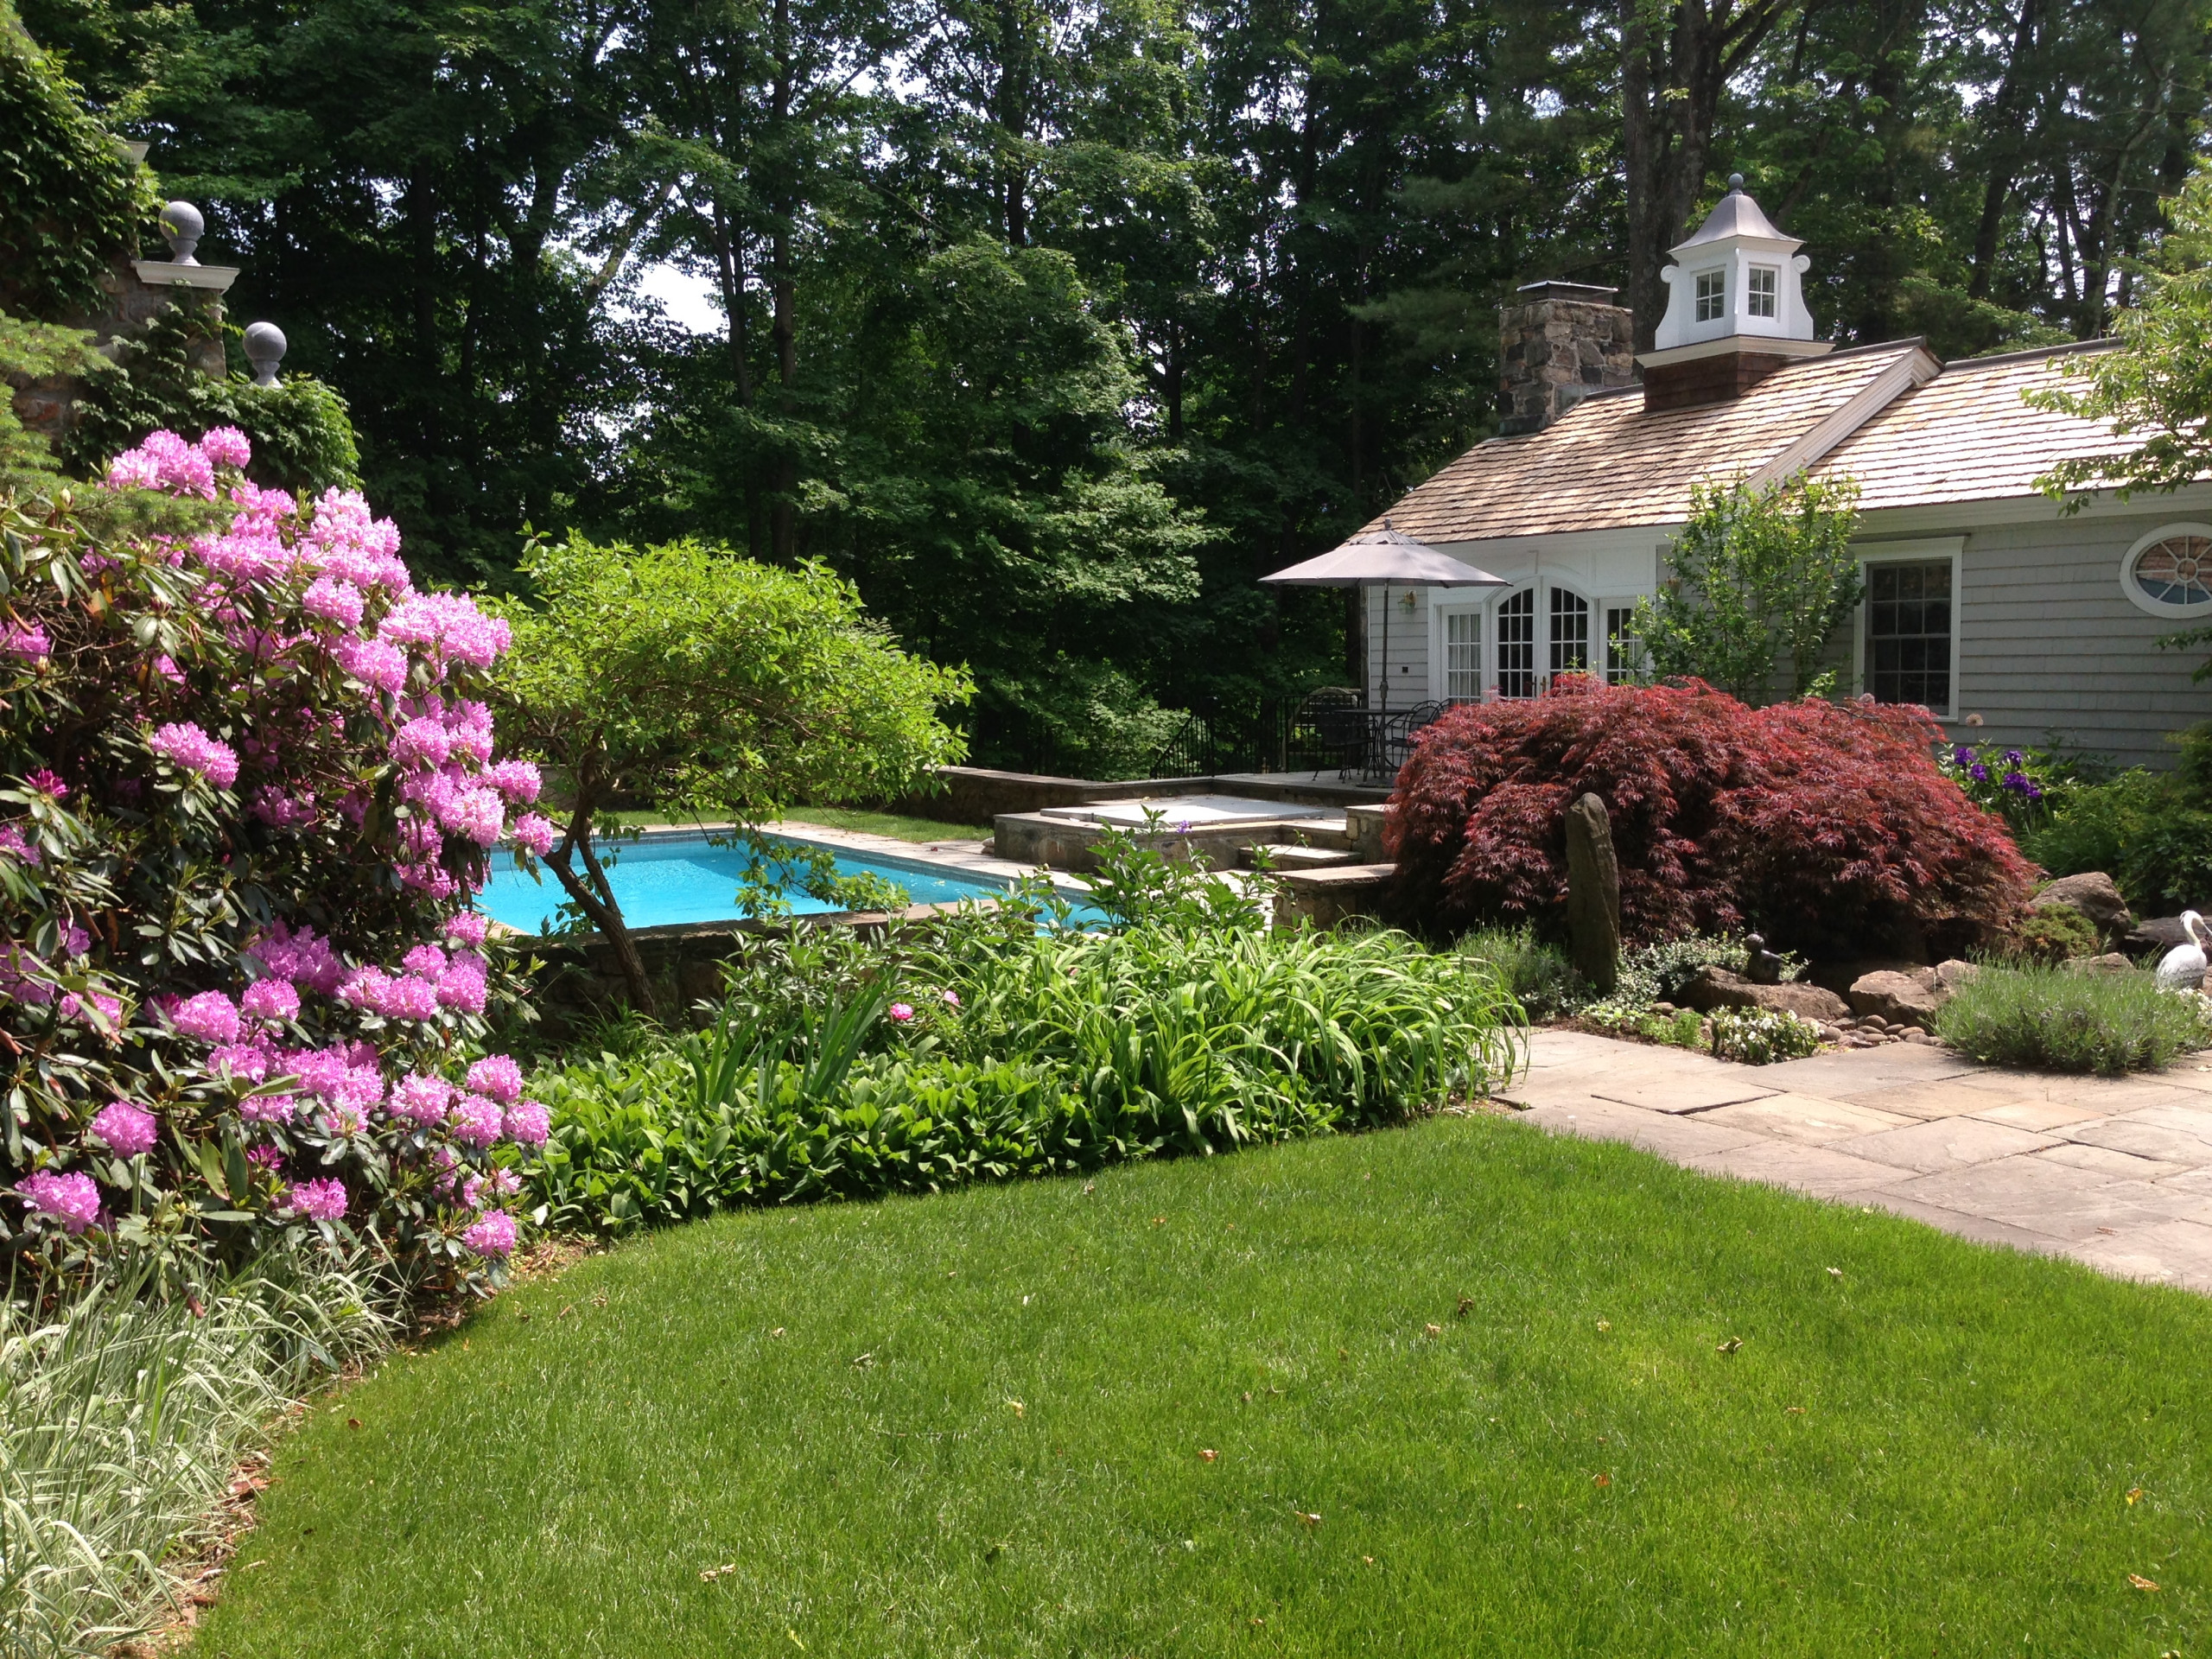 Pool House and Gardens in Bedford, NY  by Peter Atkins